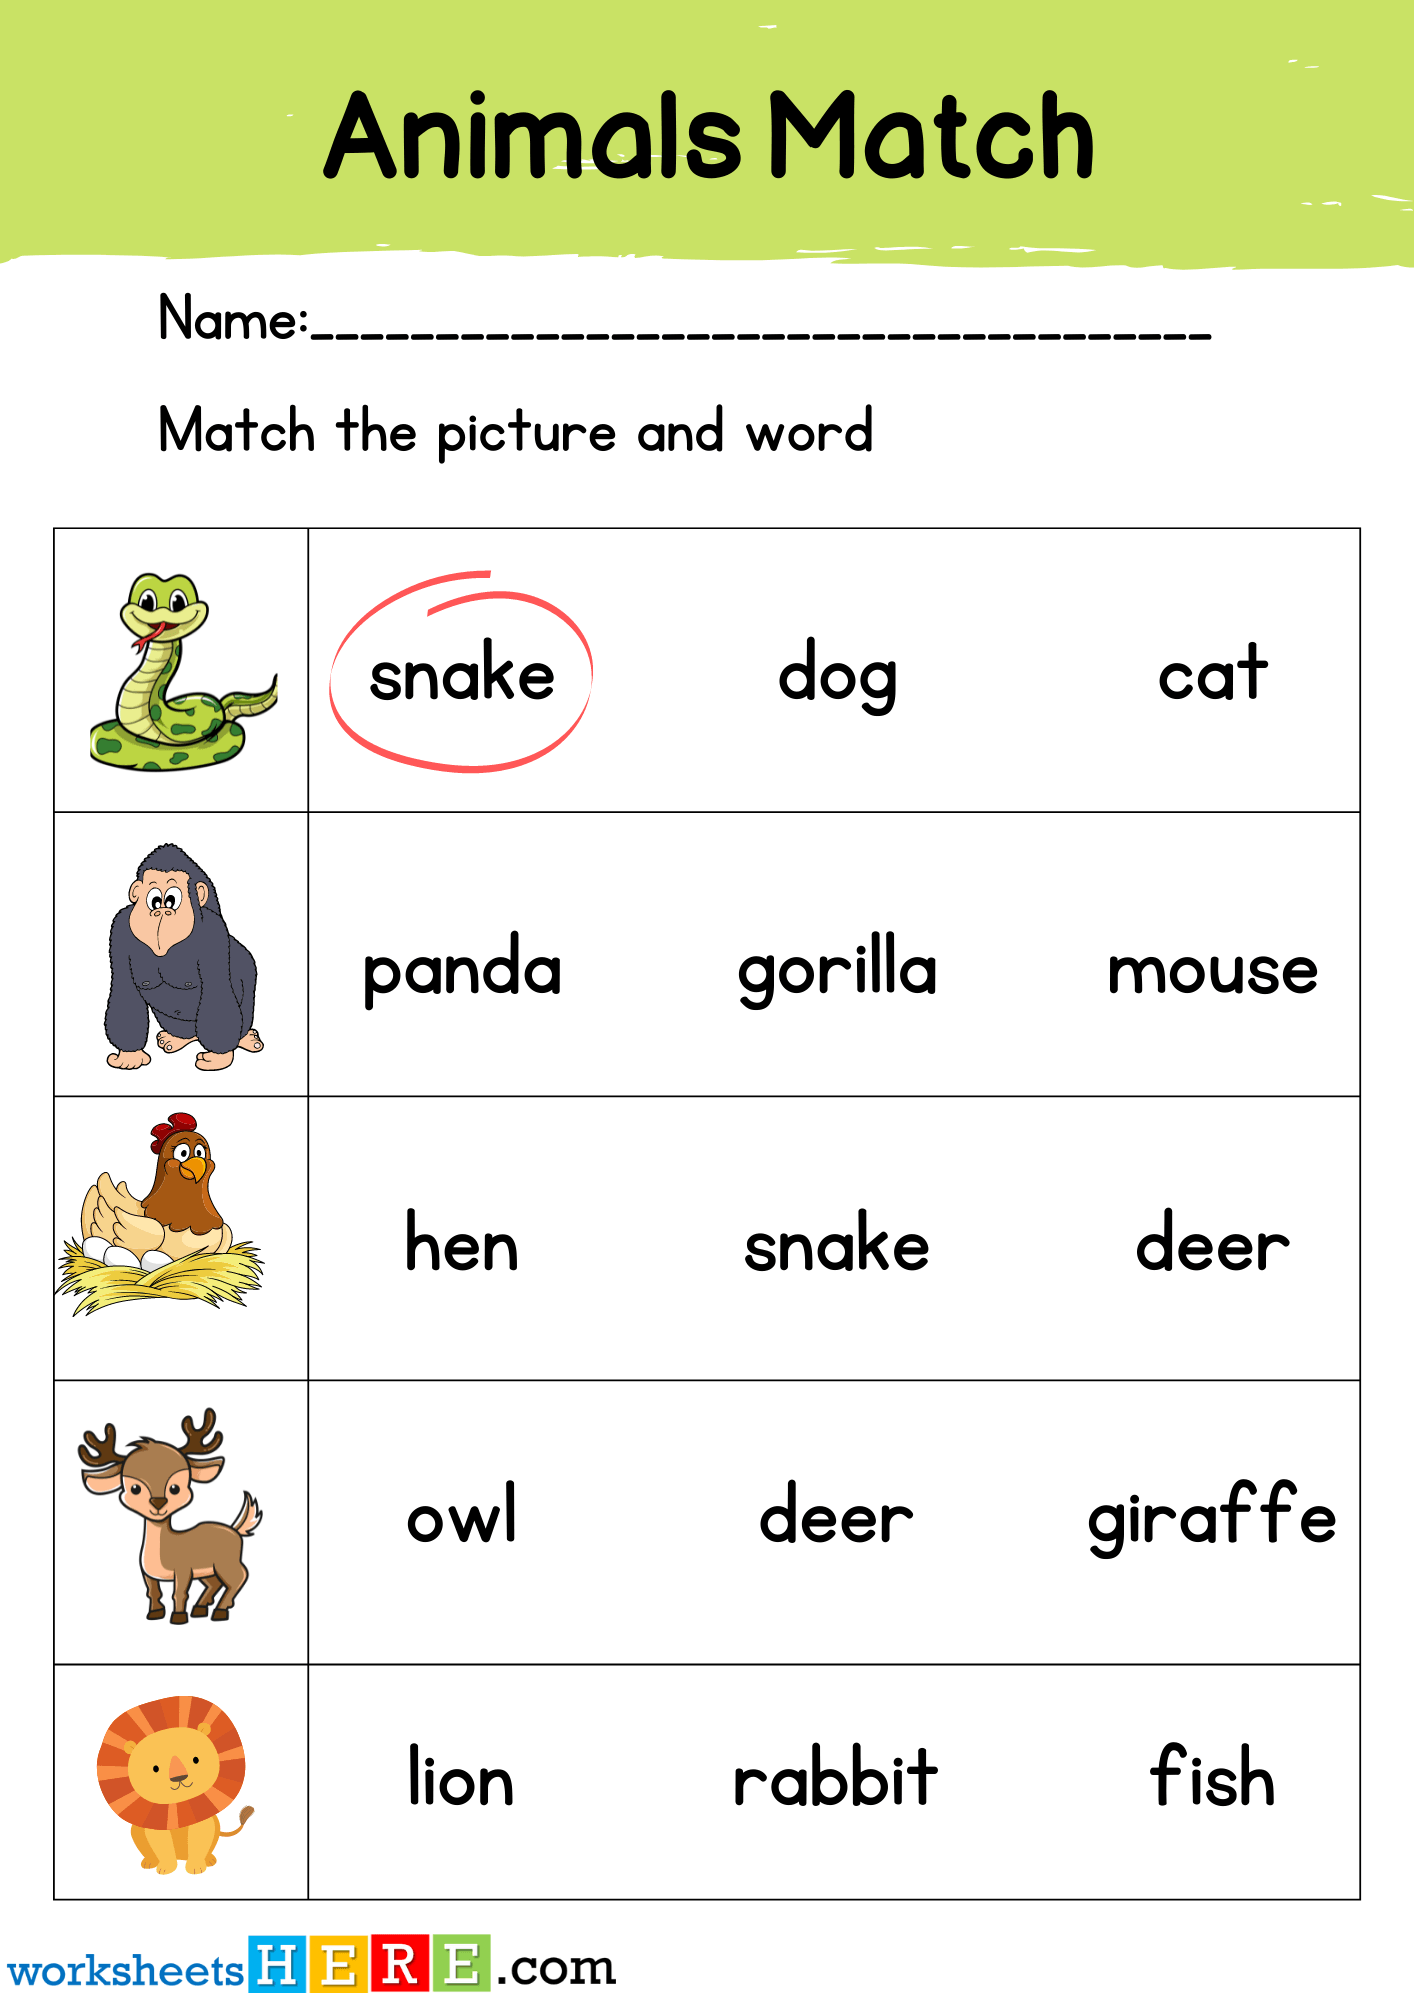 Circle Animals Names with Correct Pictures Activity PDF Worksheets For Kindergarten